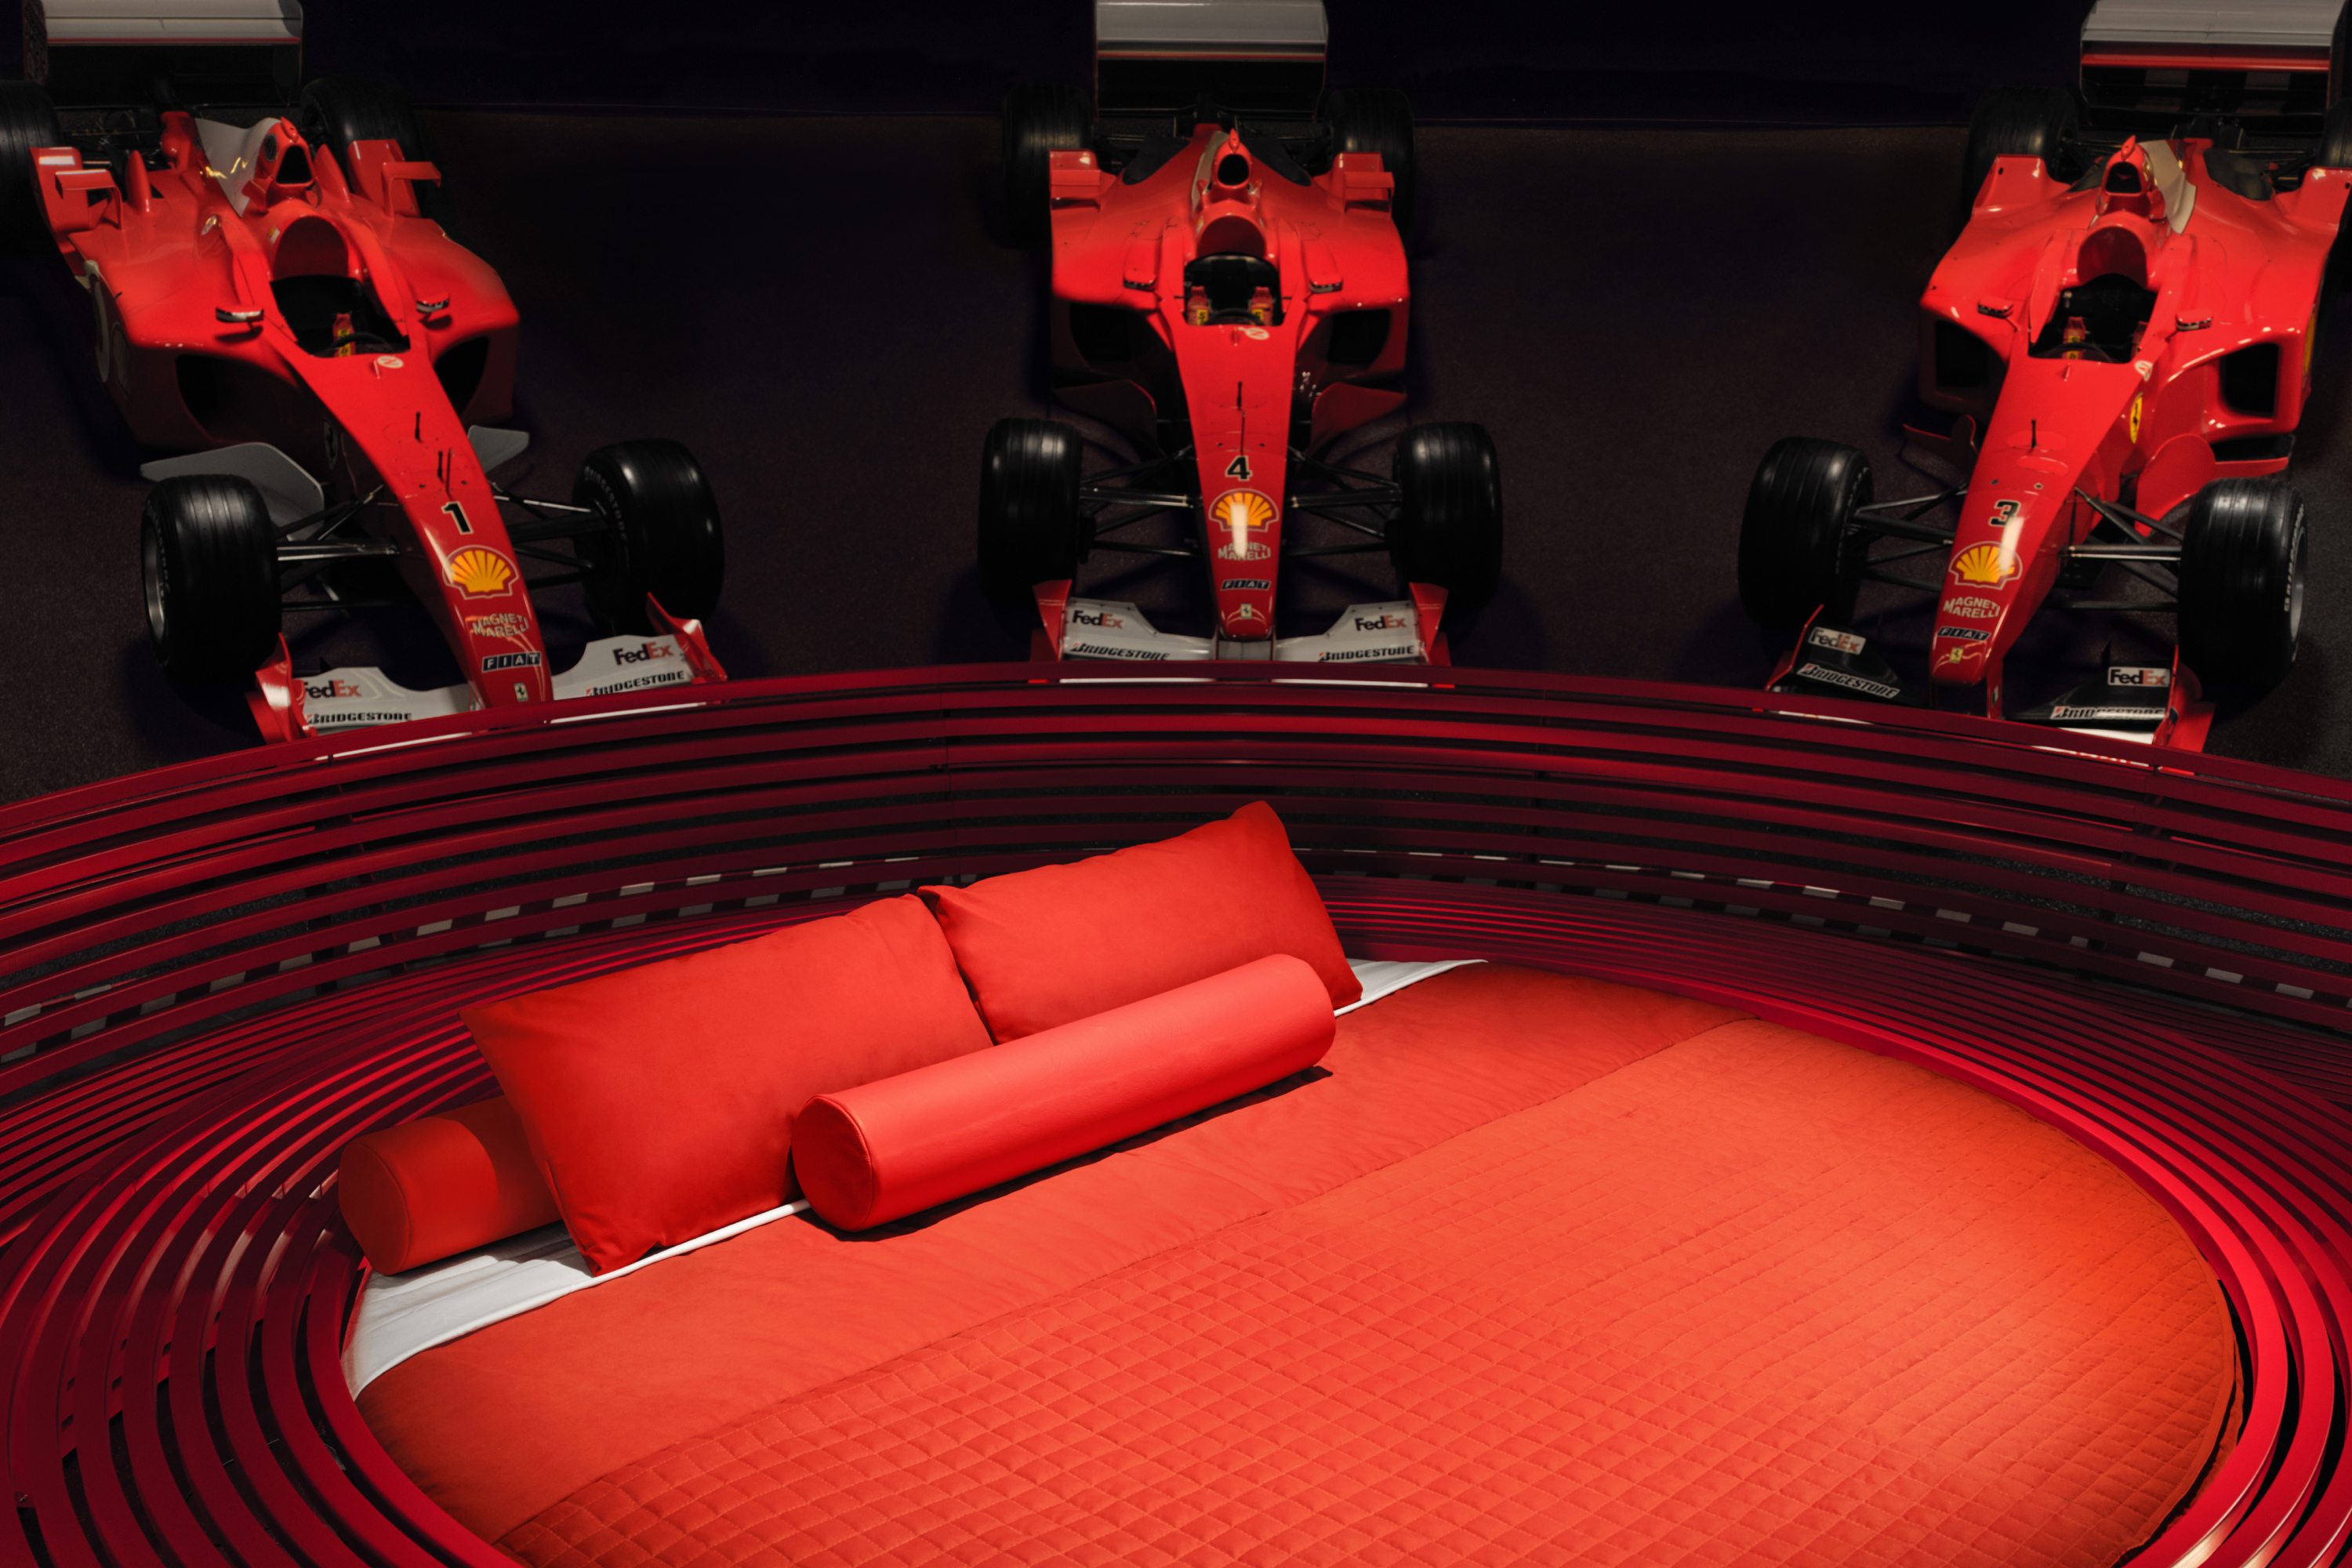 Two Ferrari Formula 1 cars flank a circular red couch in a room with concentric circles on the floor